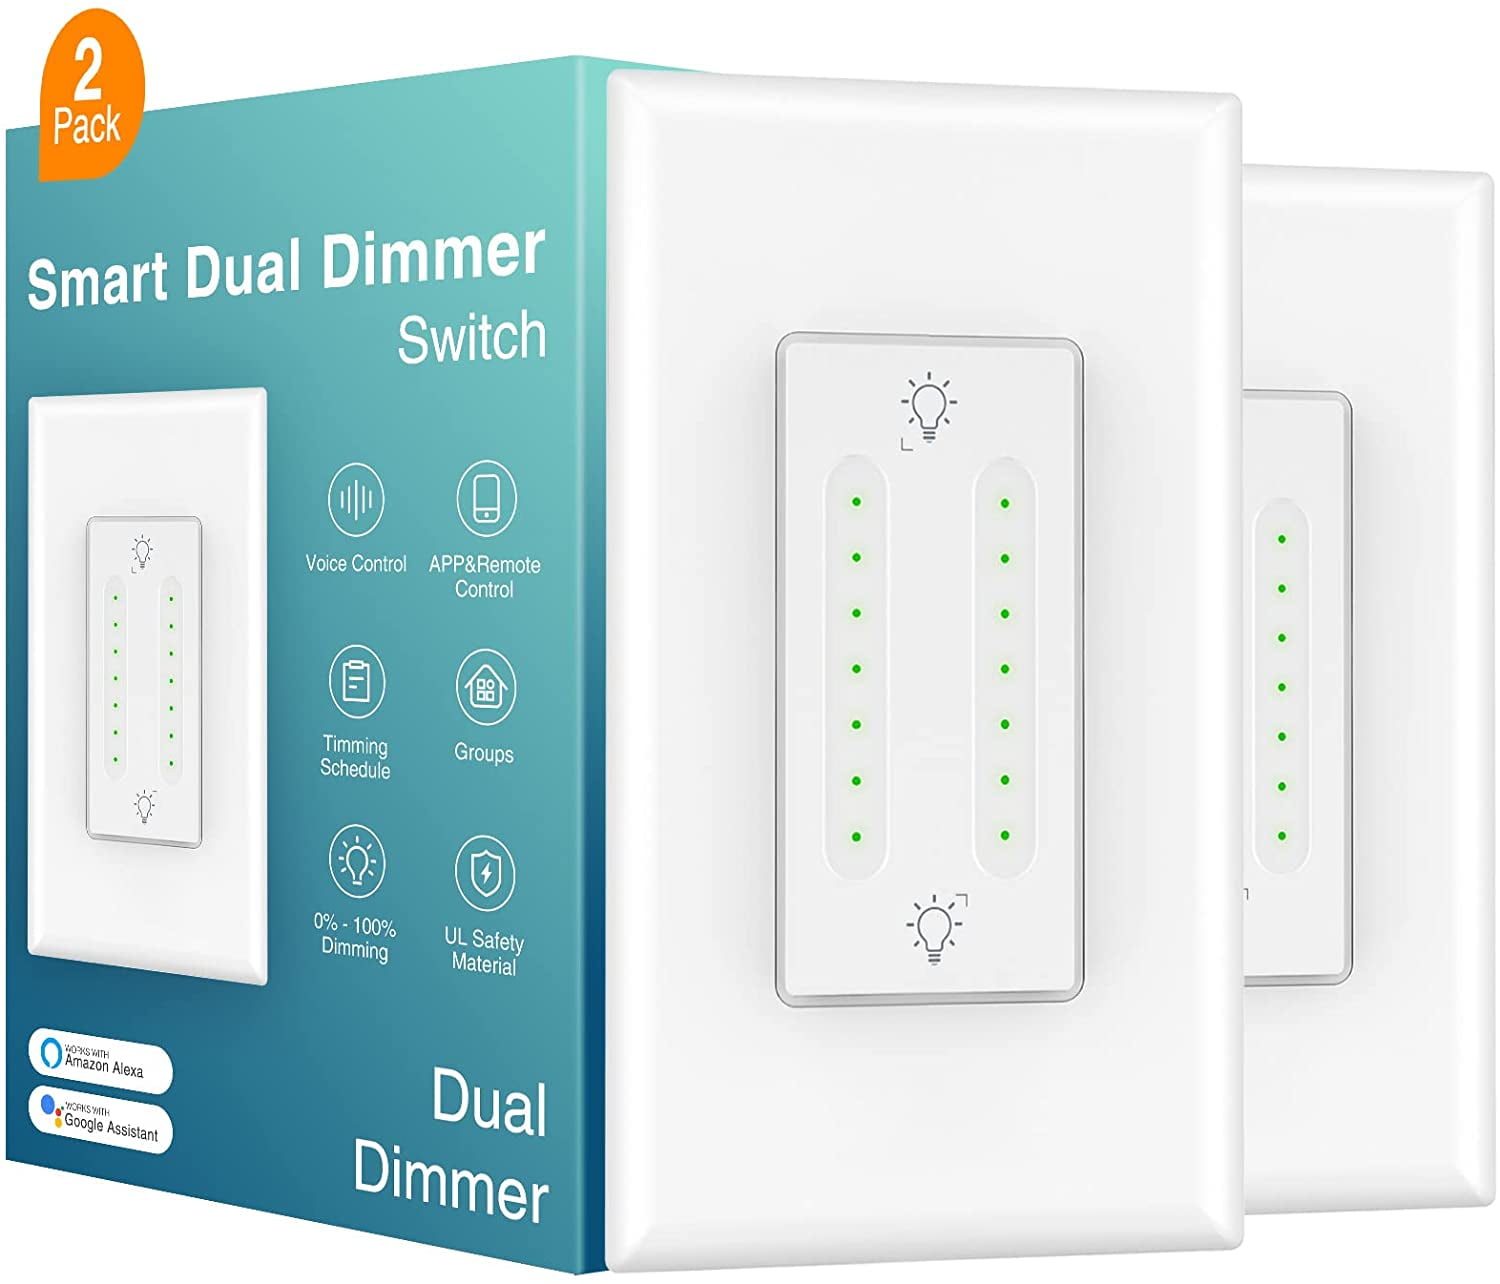 2 Pack WiFi Dimmer Switch, FORNORM Smart Light Switch, Dimmable, 2000 W,  Compatible with  Echo/Alexa and Google Home, App Remote Control,  Timer, Countdown, Memory Function, 2.4 GHz for Android : 